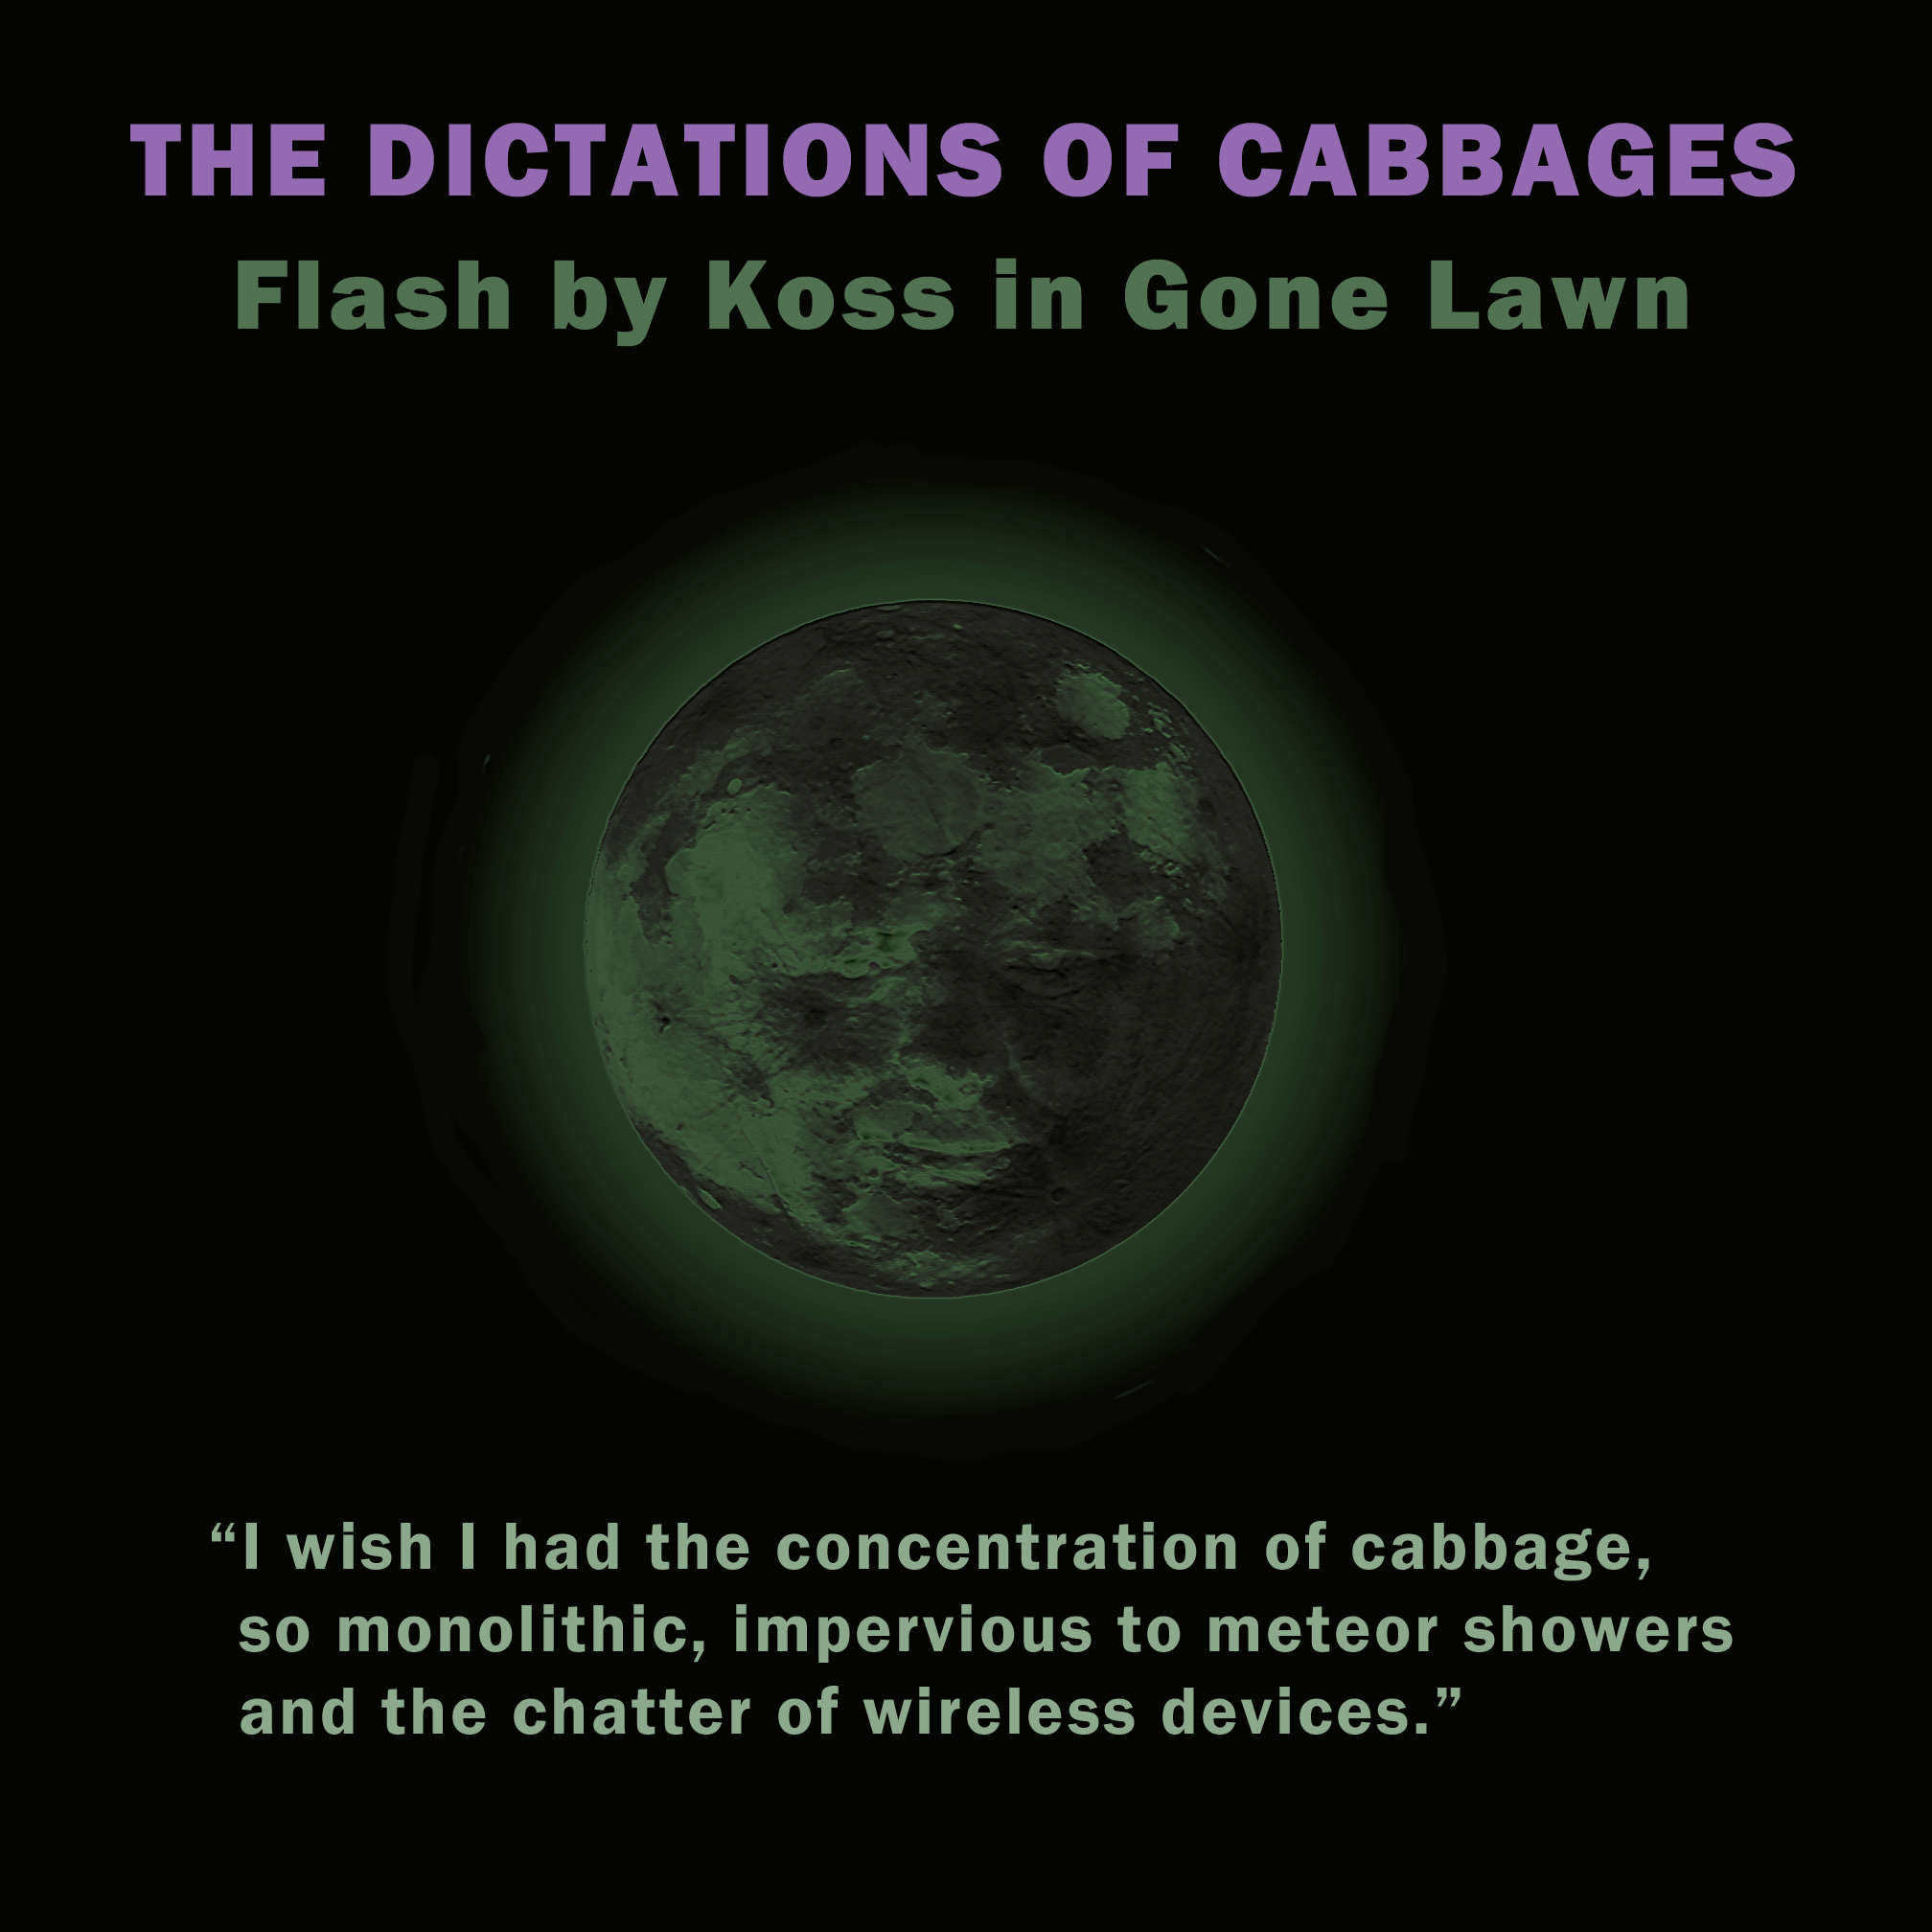 Gone Lawn flash publication with cabbage moon face by Koss--a green moon on black background